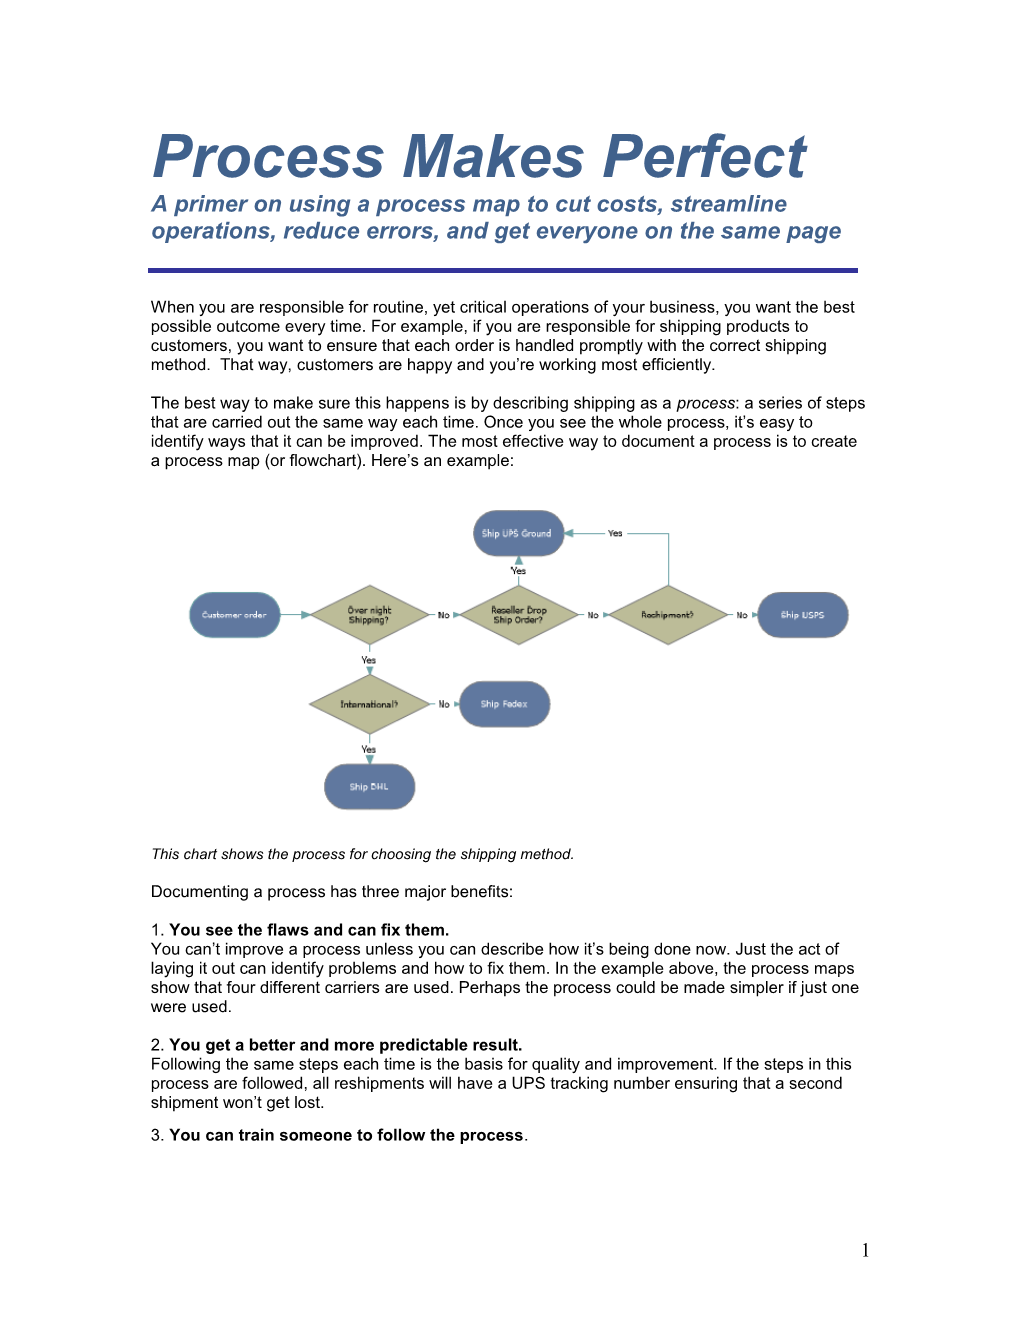 Optimize Your Operations with a Process Map